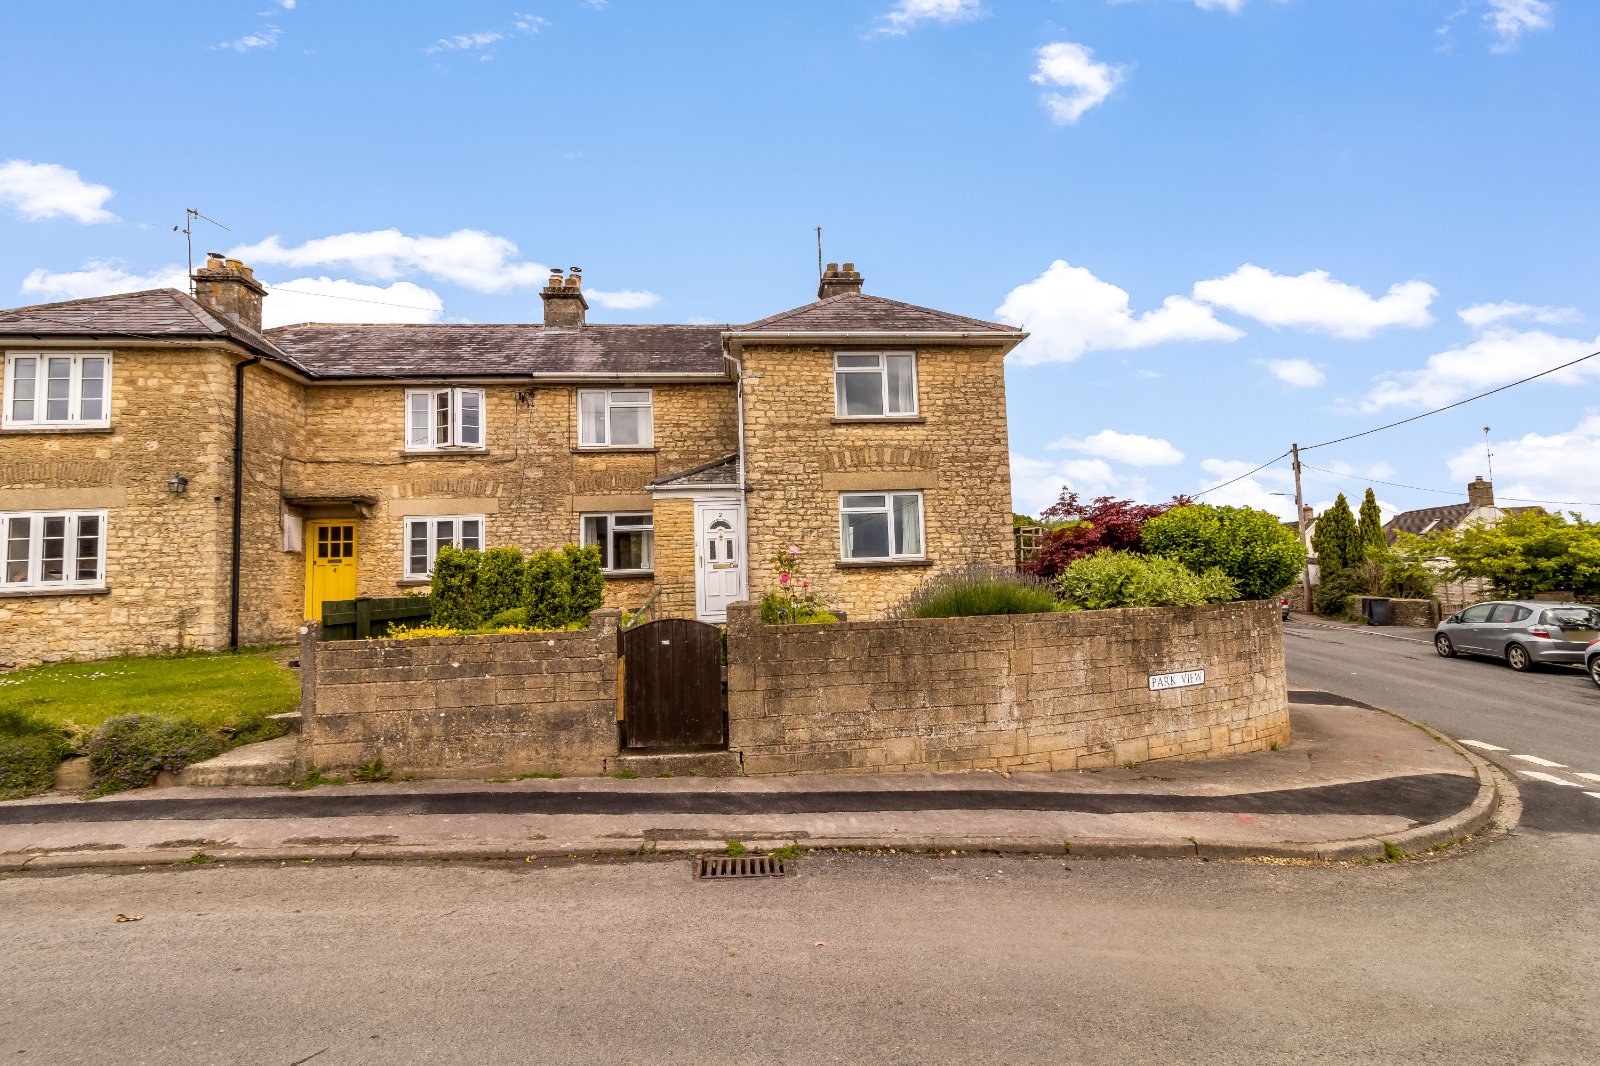 Park View, Stratton, Cirencester, Gloucestershire, GL7